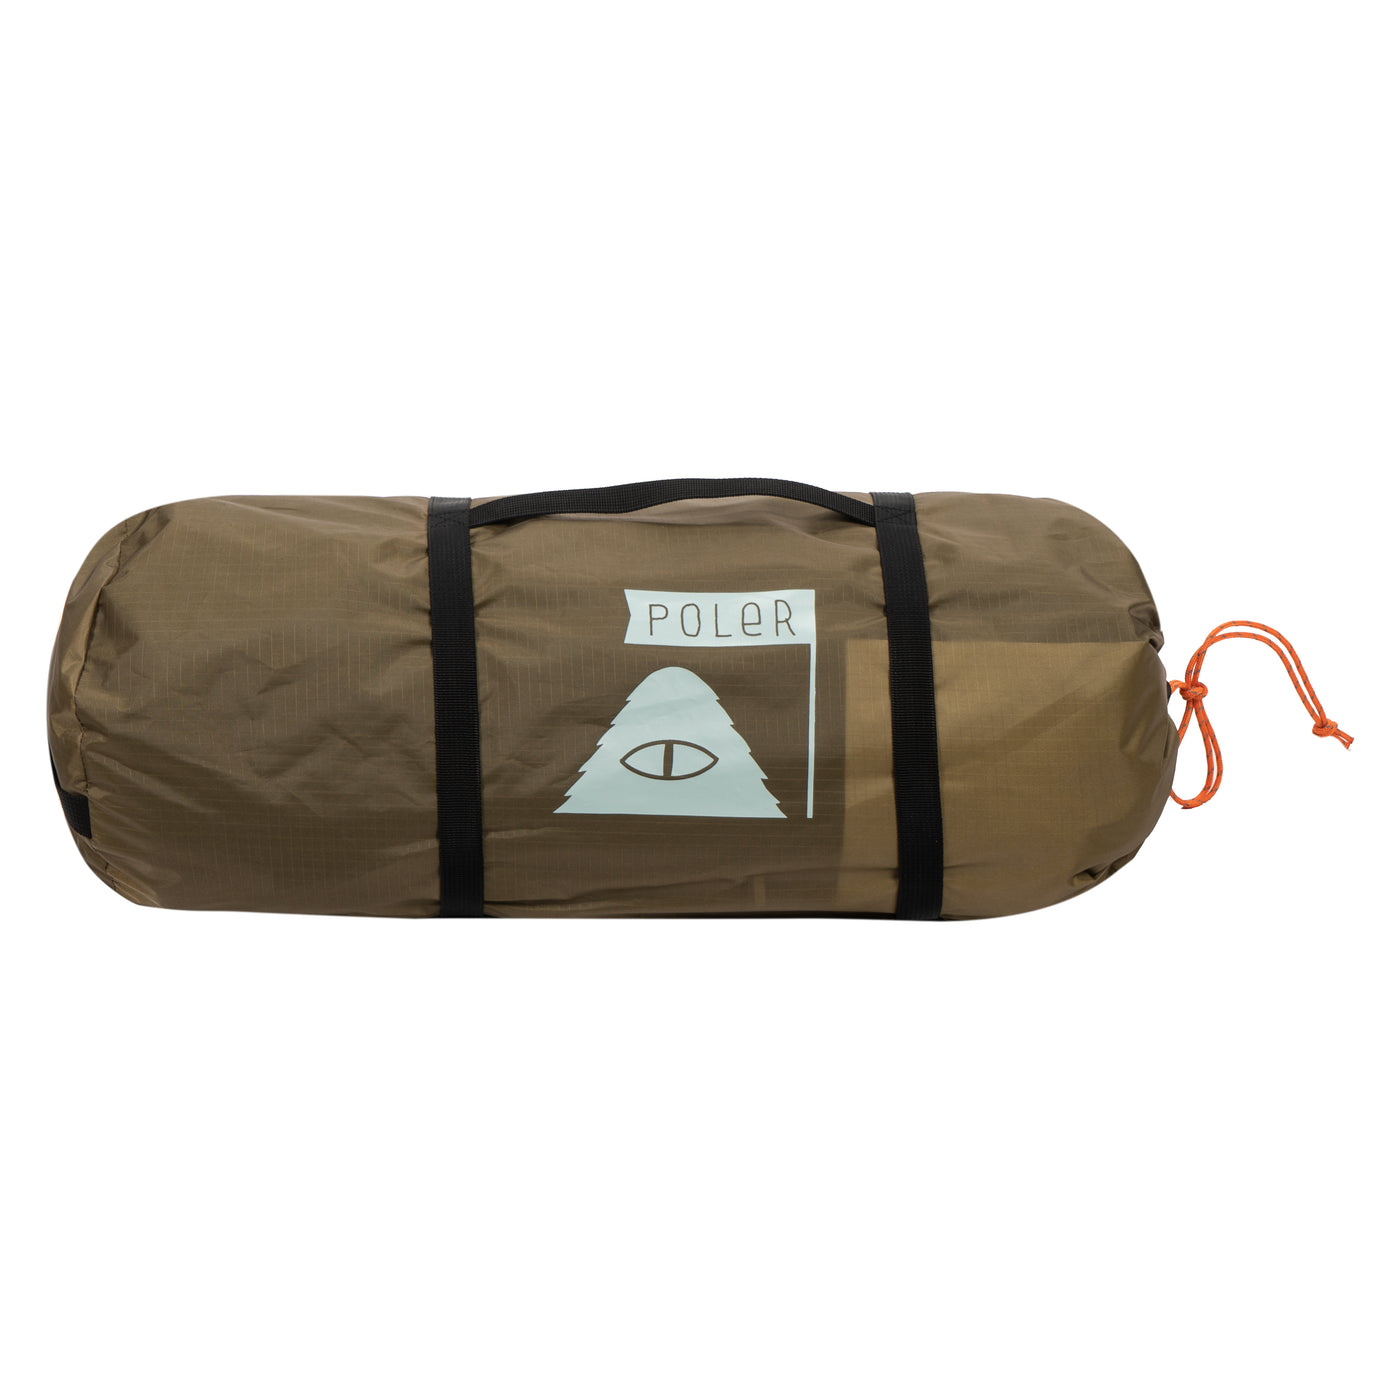 2 Person Tent - Rockies product   